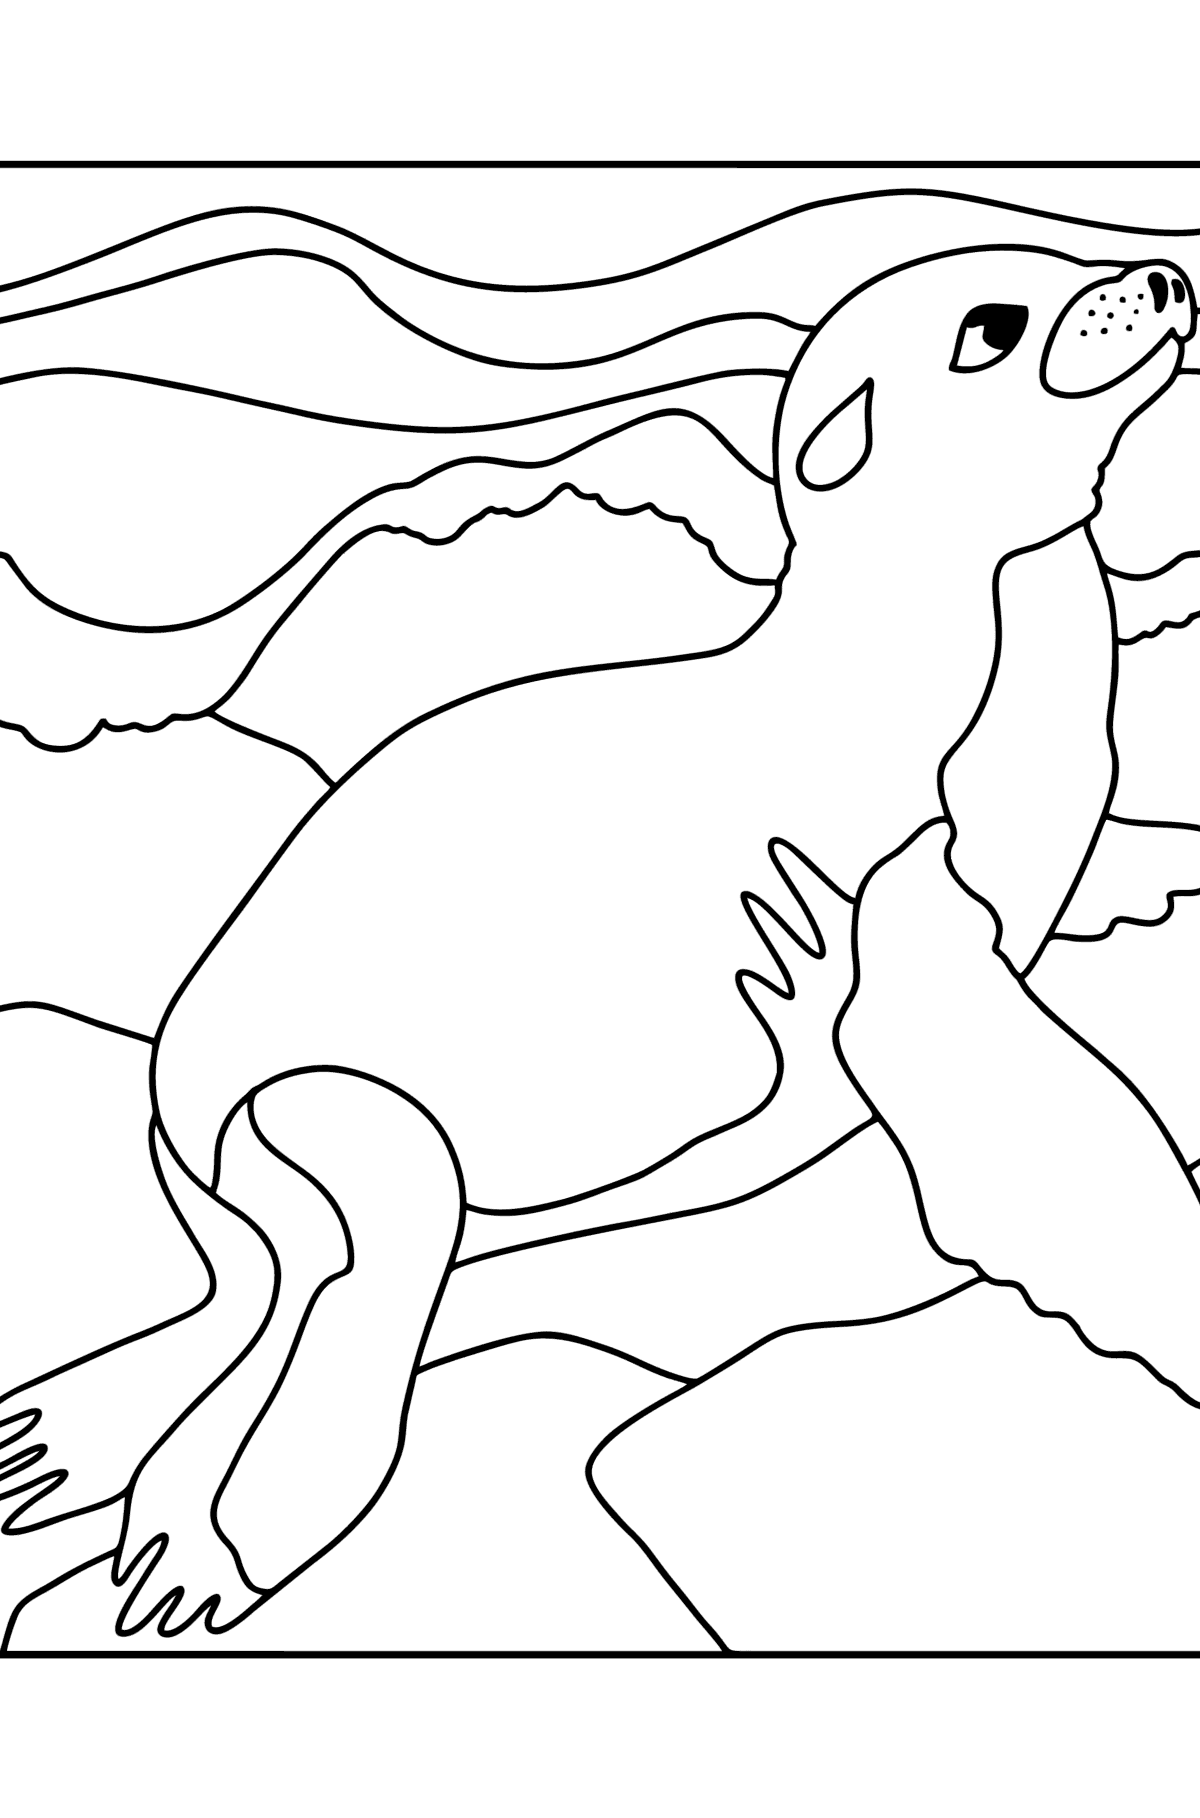 Little Seal coloring page - Coloring Pages for Kids